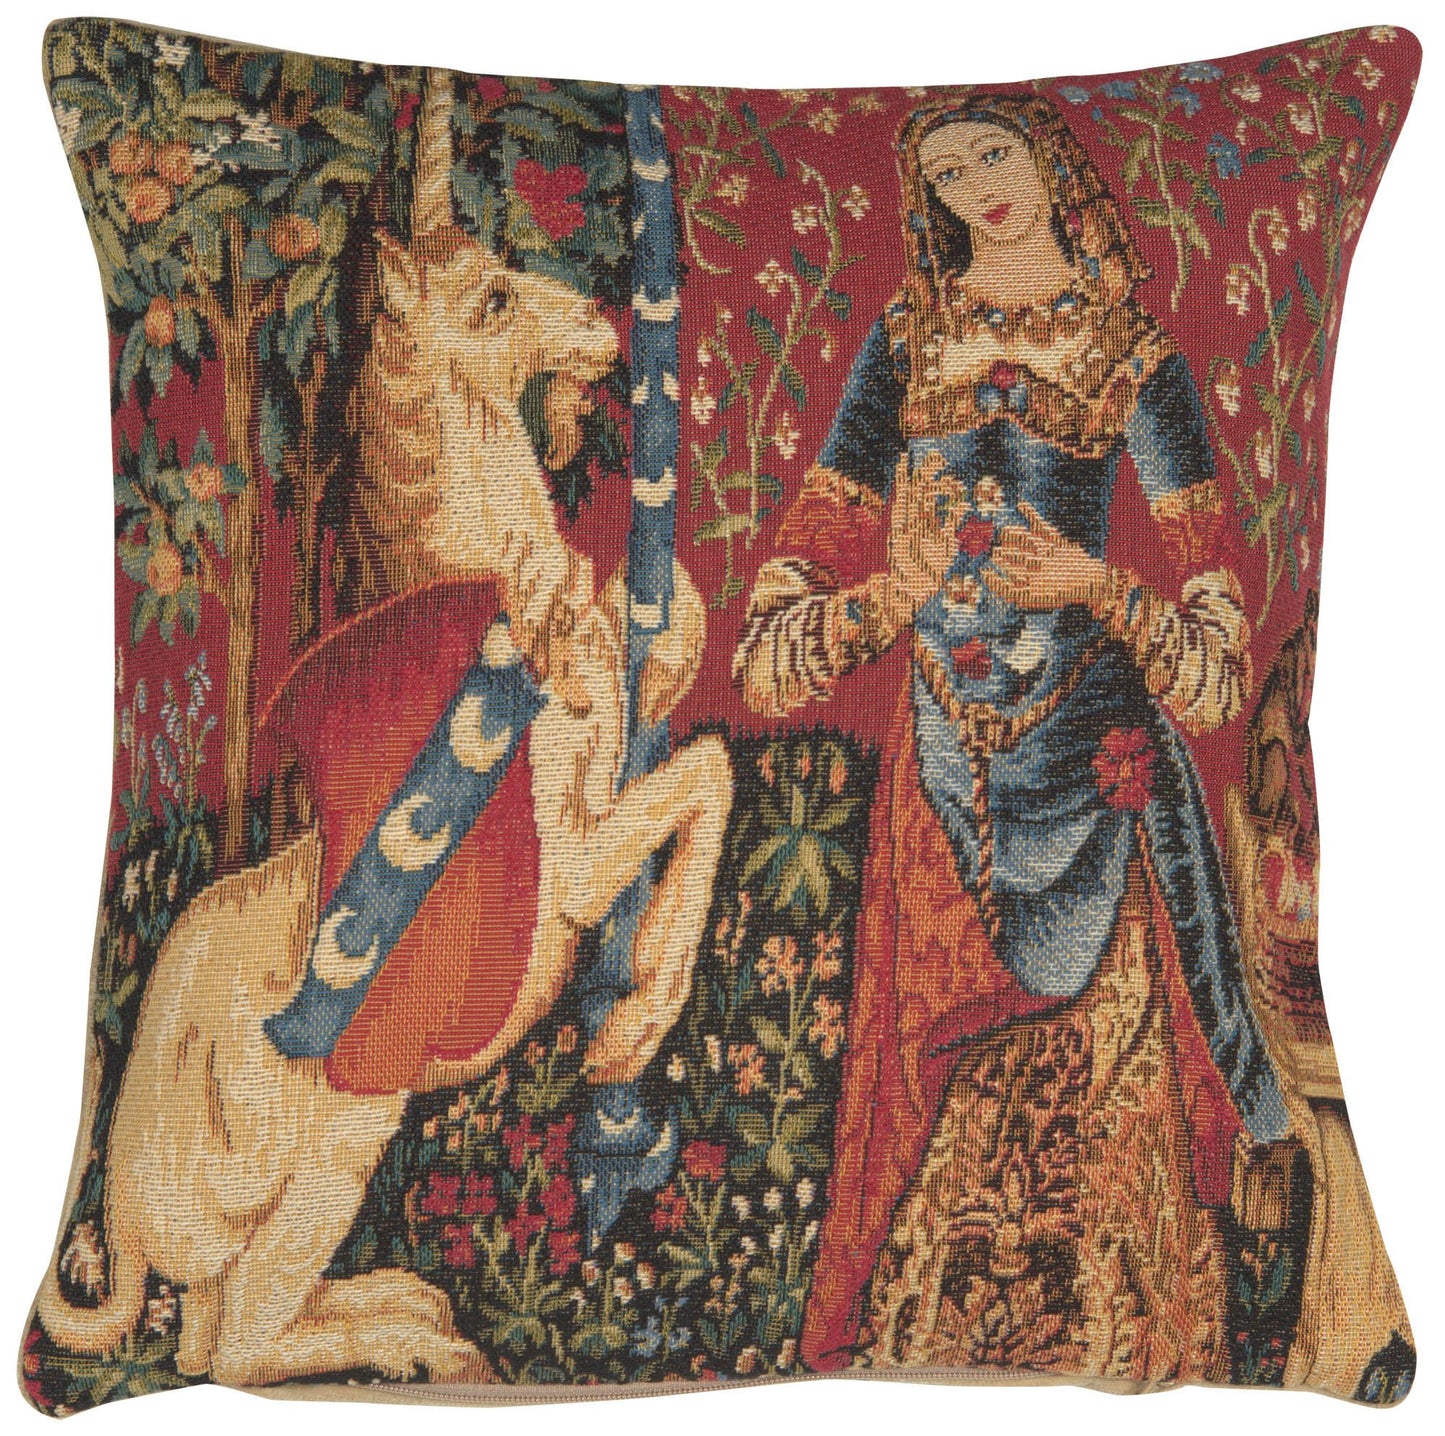 Medieval Smell Small European Cushion Covers - RoseStraya.com